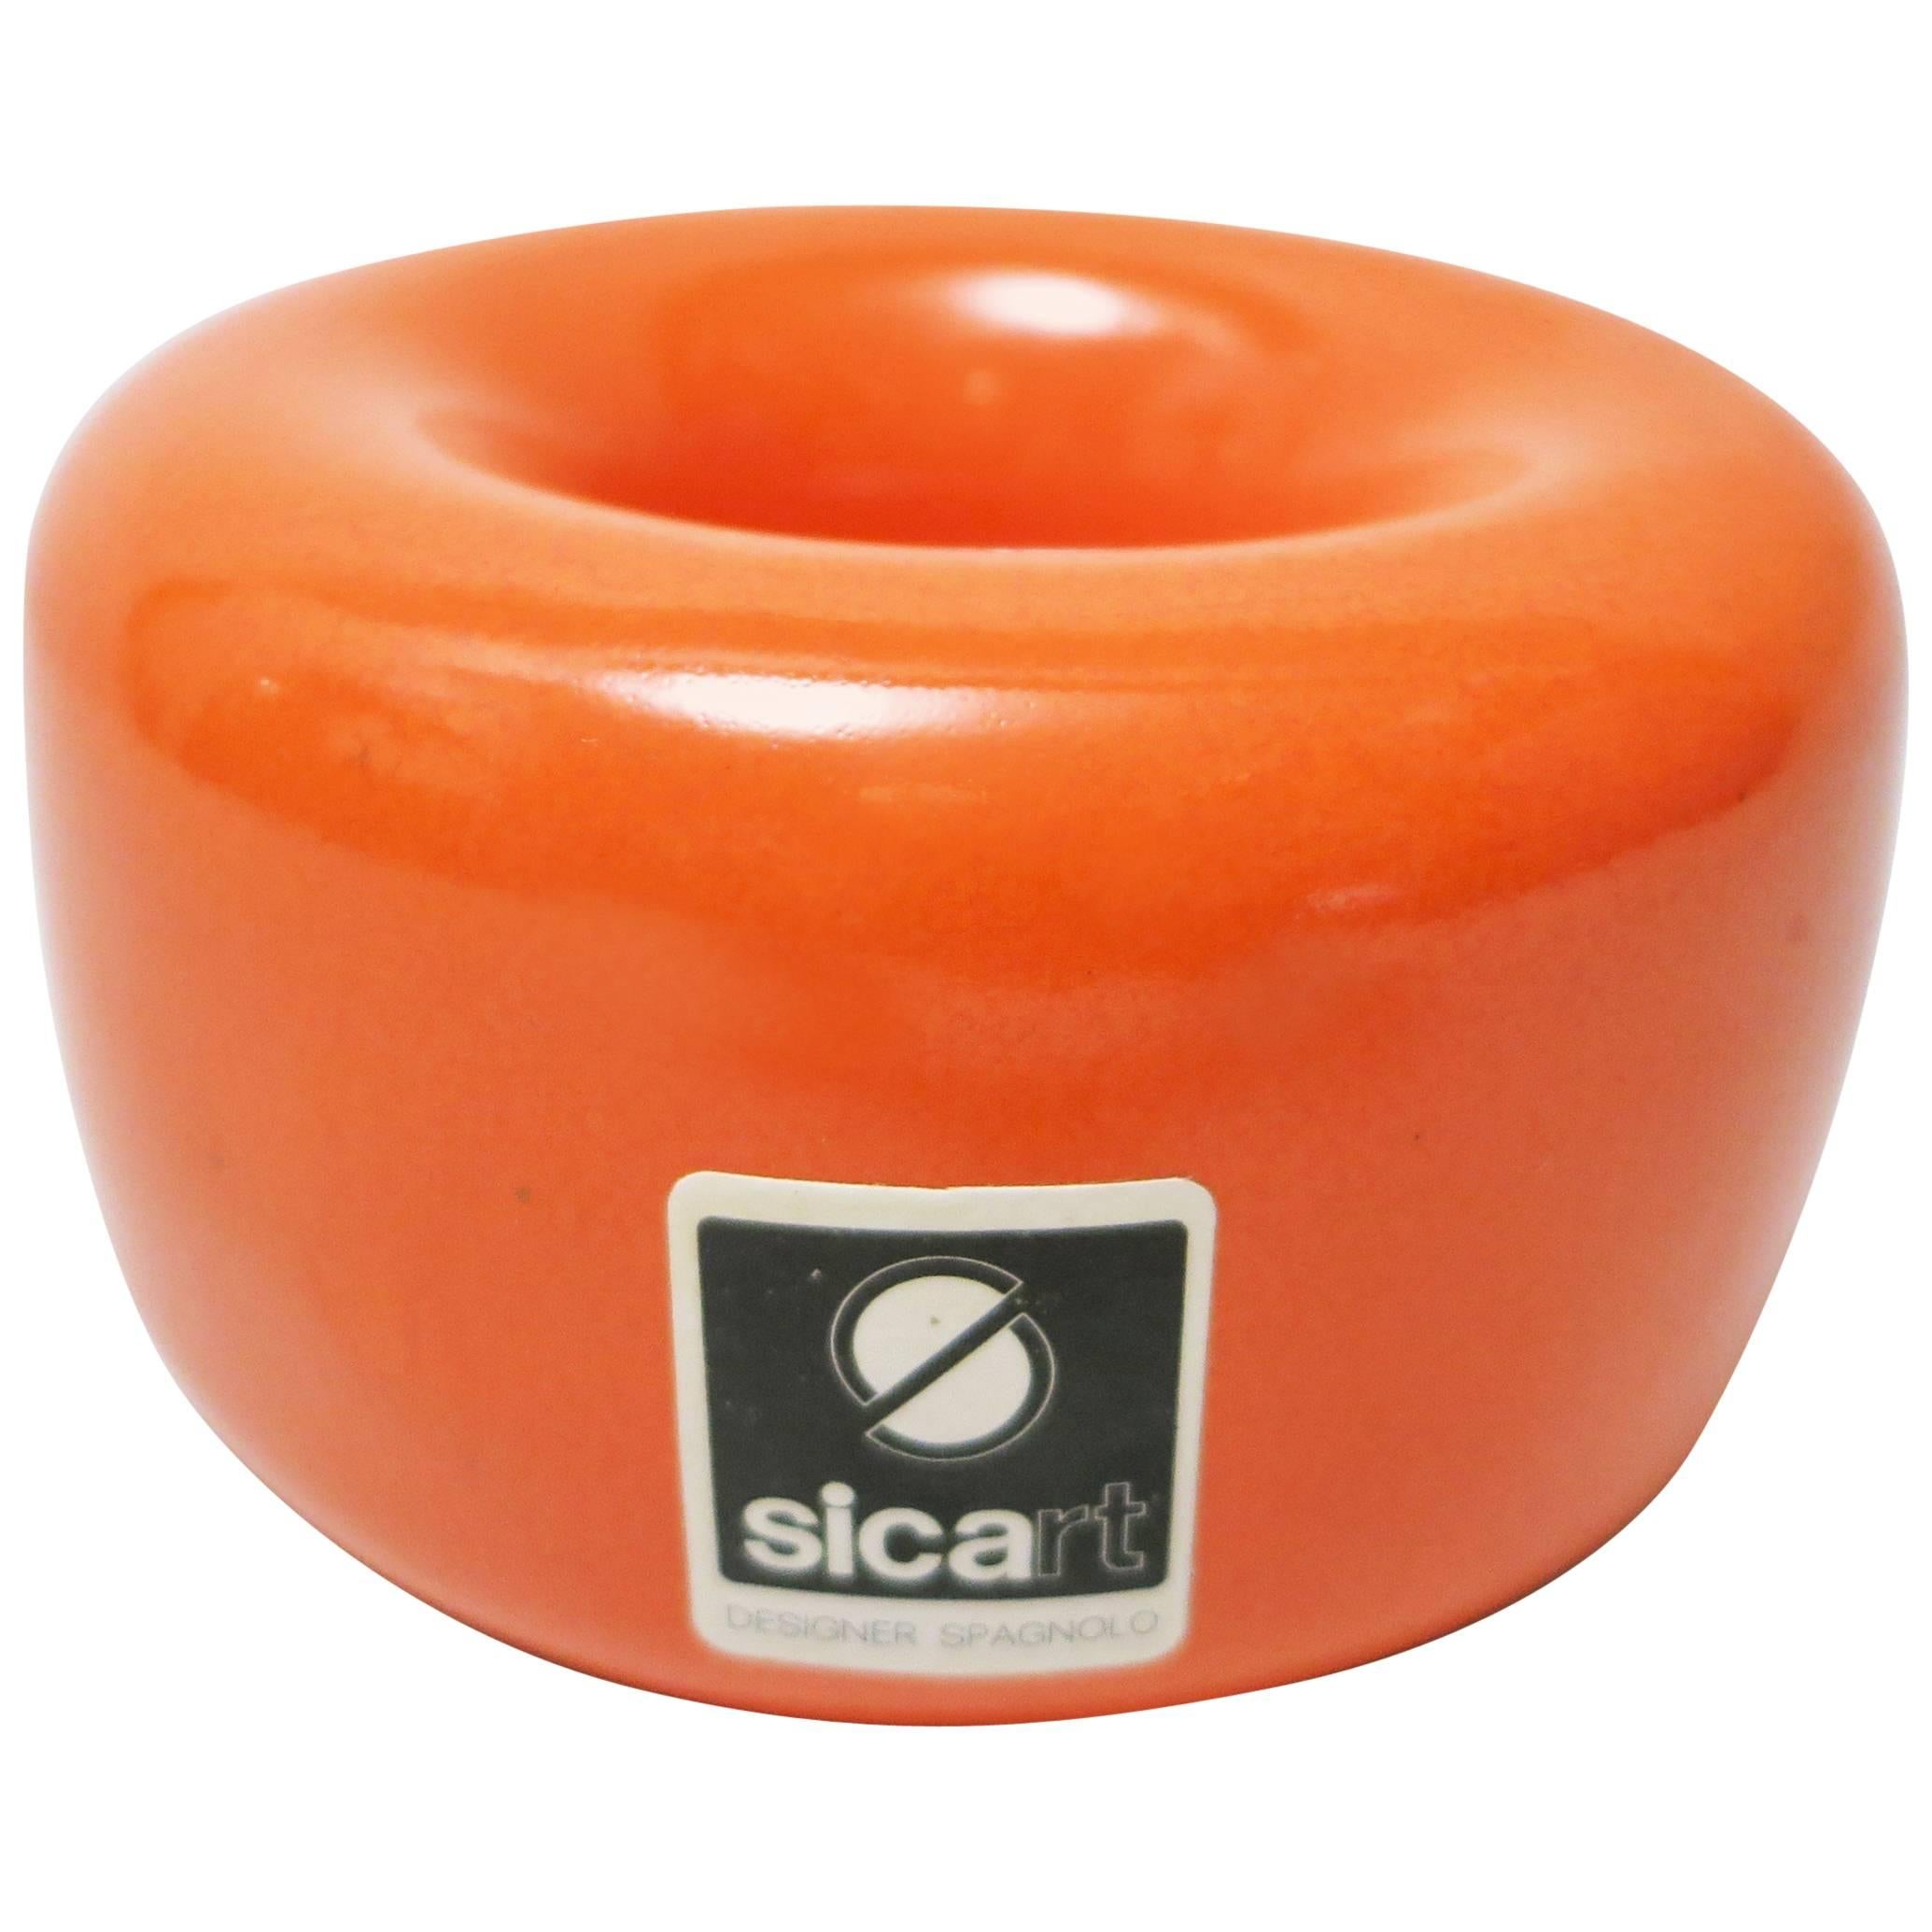 1970s Orange Ceramic Ashtray by Pino Spagnolo and Sicart For Sale